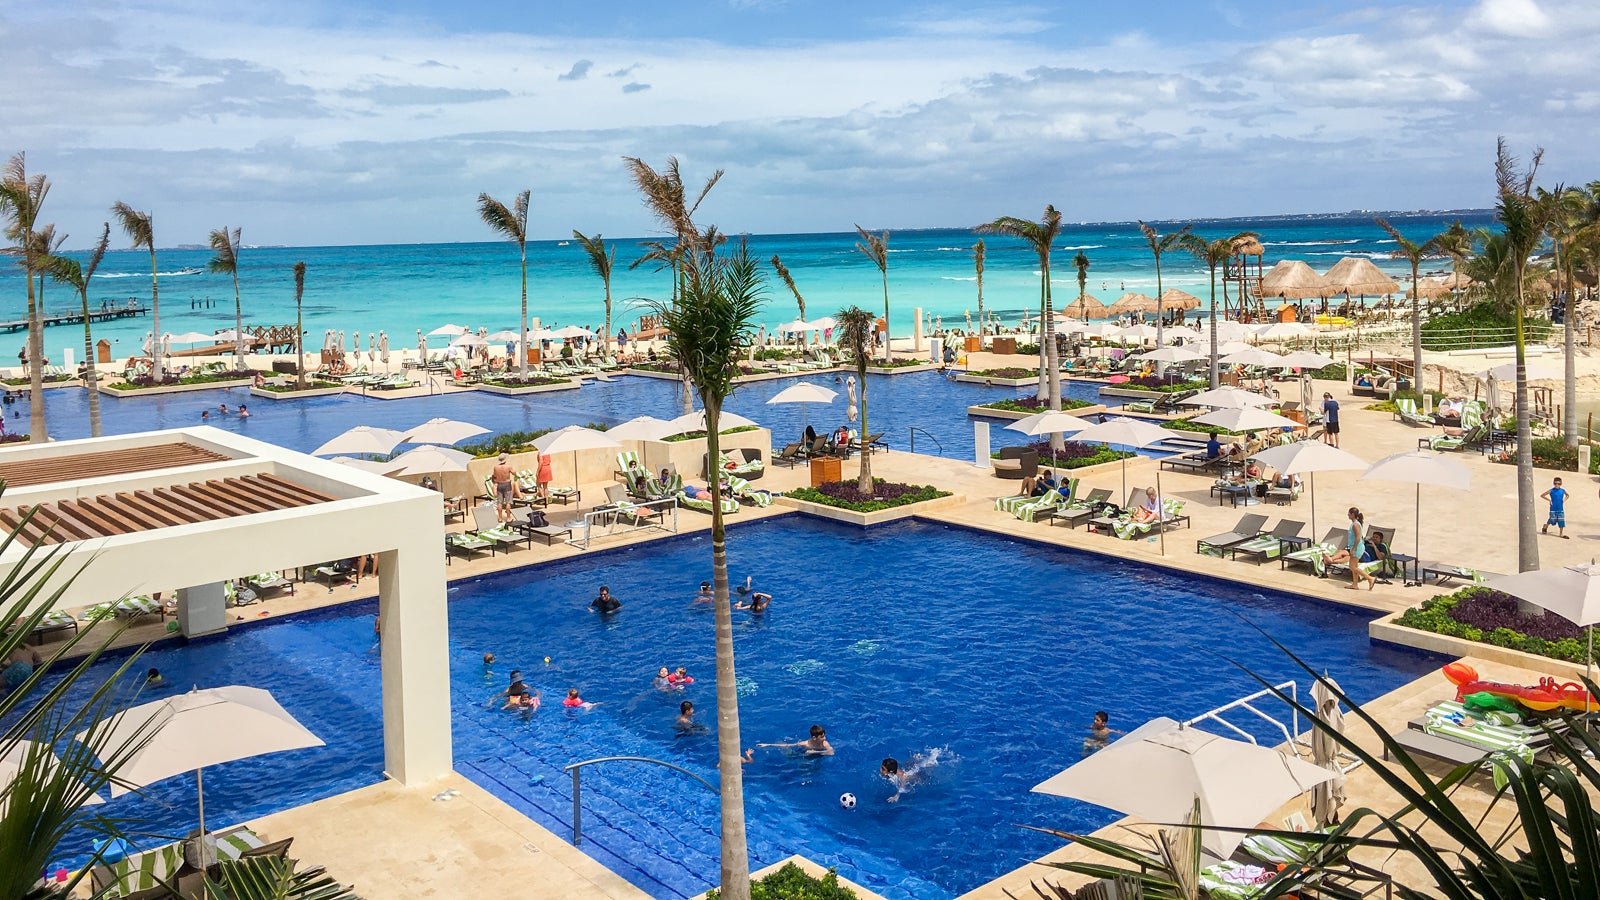 8 Things Families Can Do at Hyatt Ziva Cancun The Points Guy